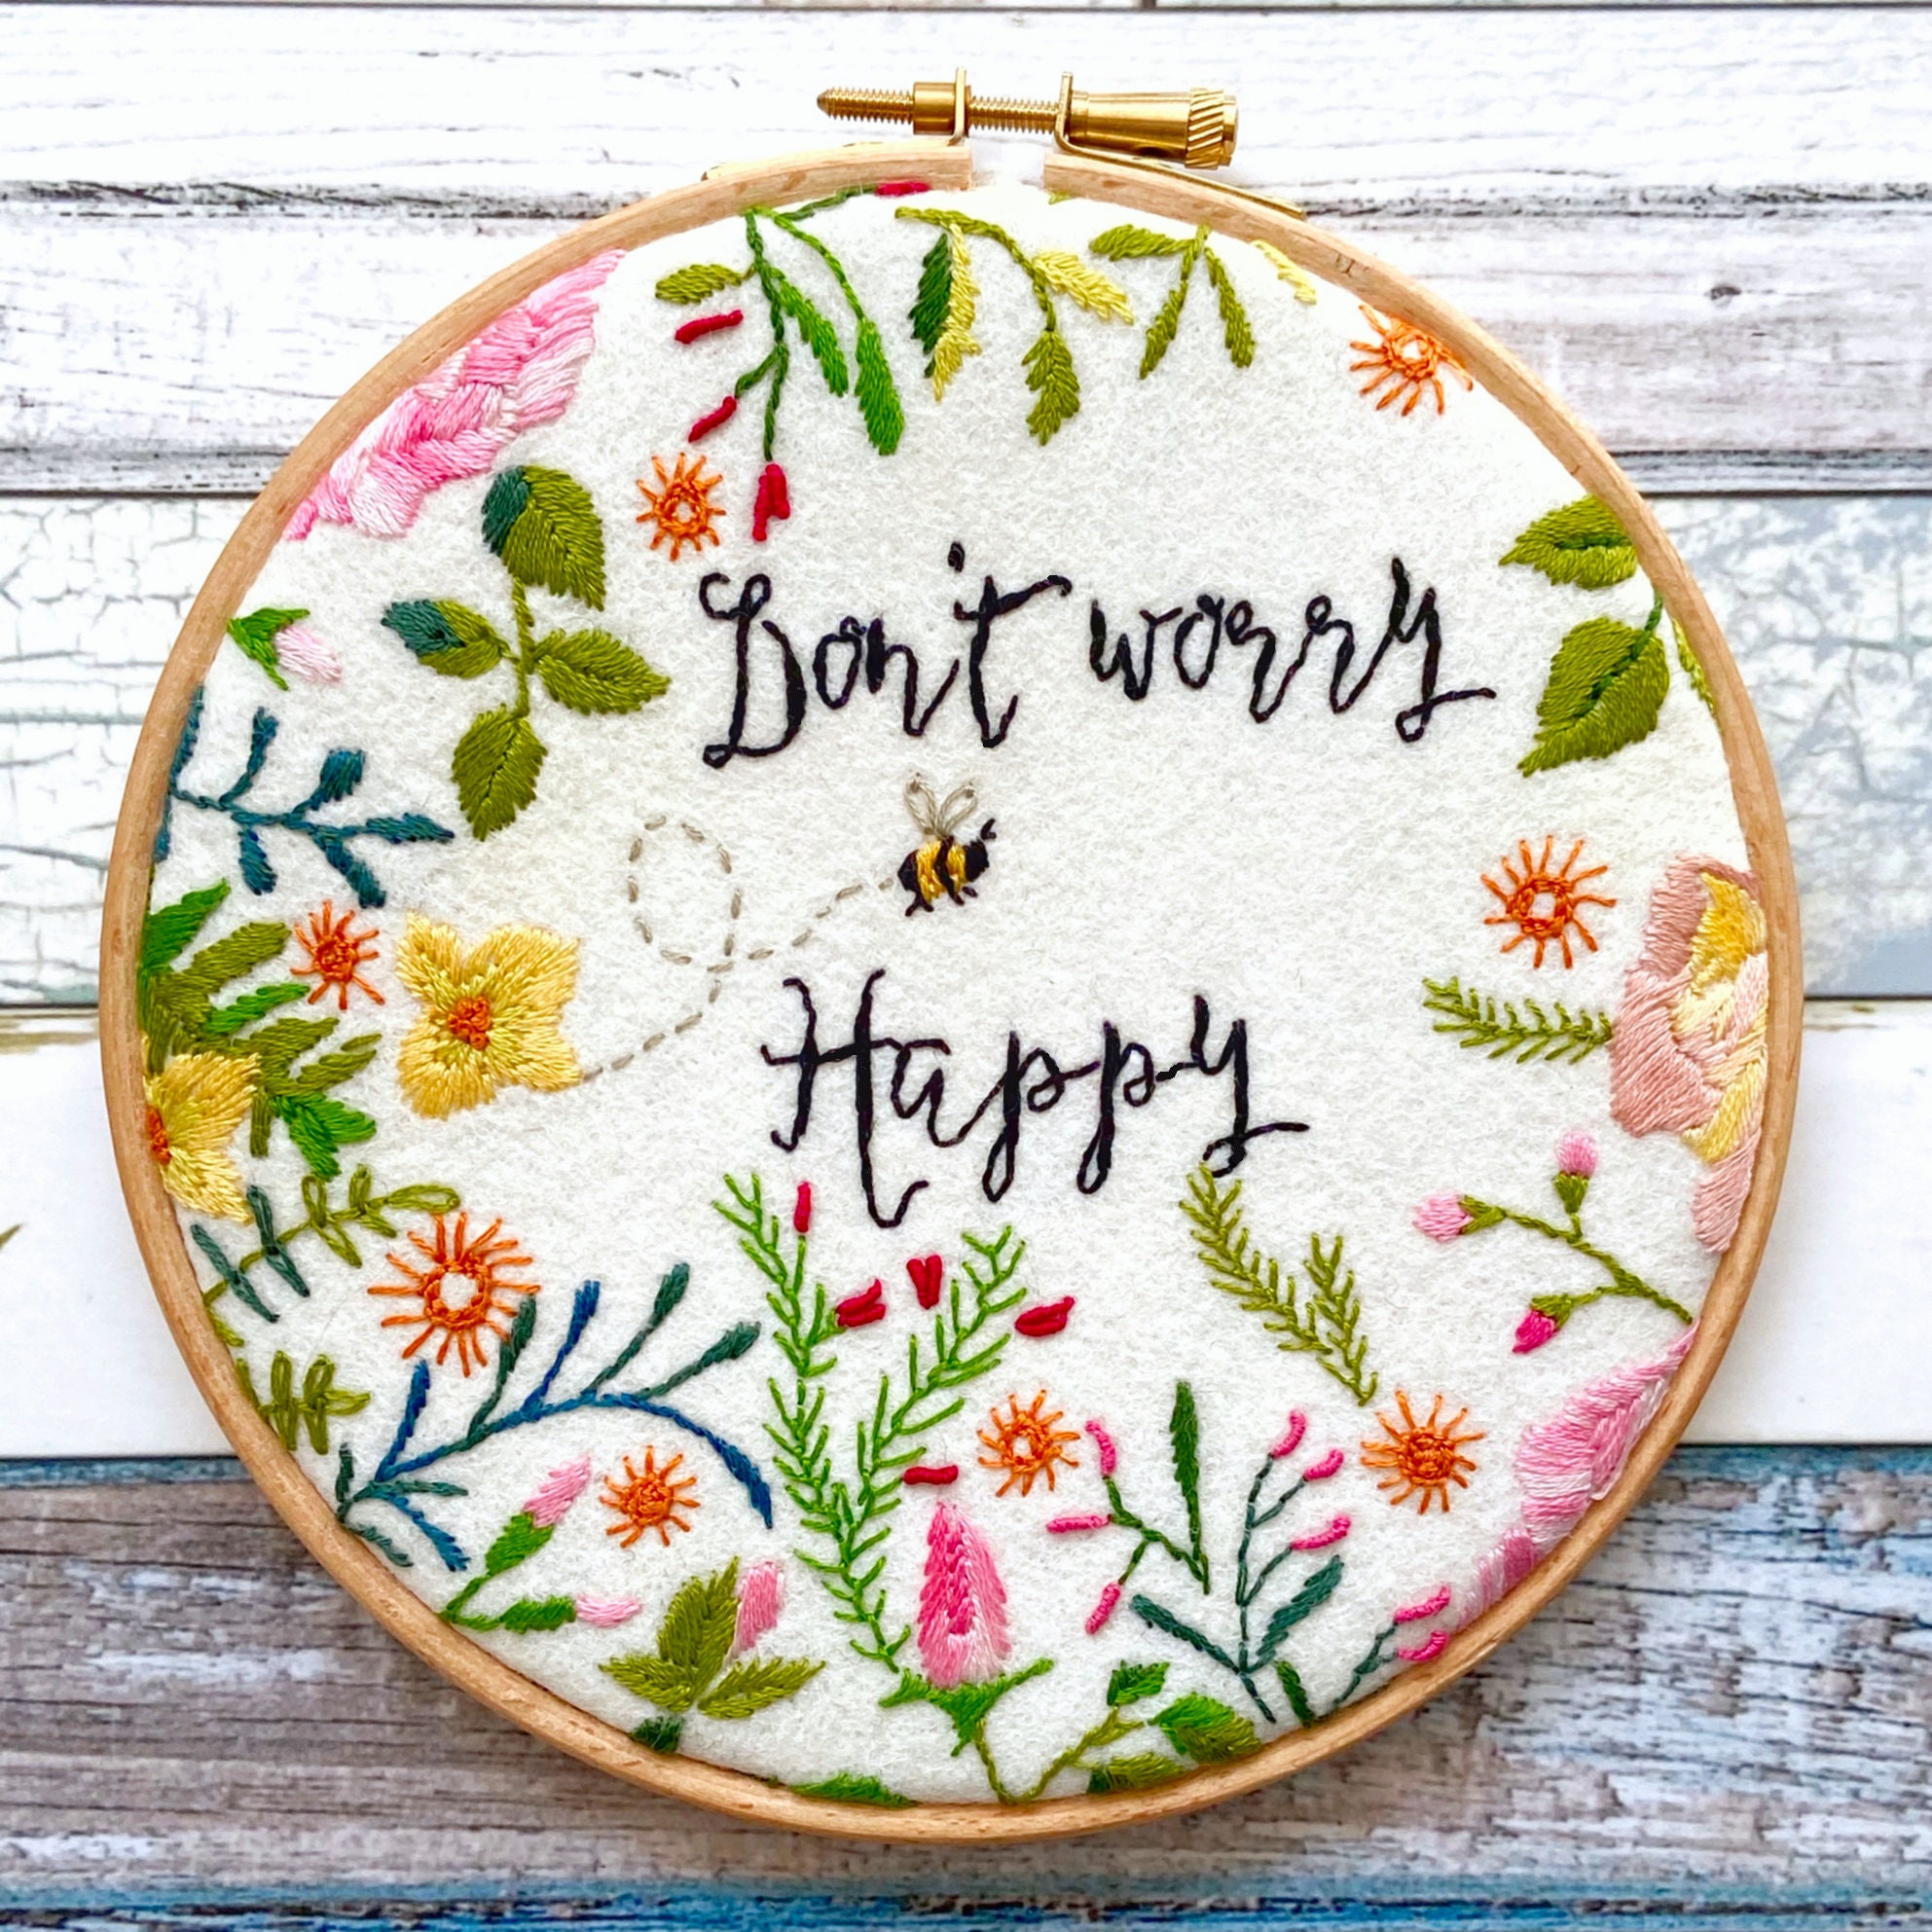 5 Ways to Decorate an Embroidery Hoop - Stitchdoodles